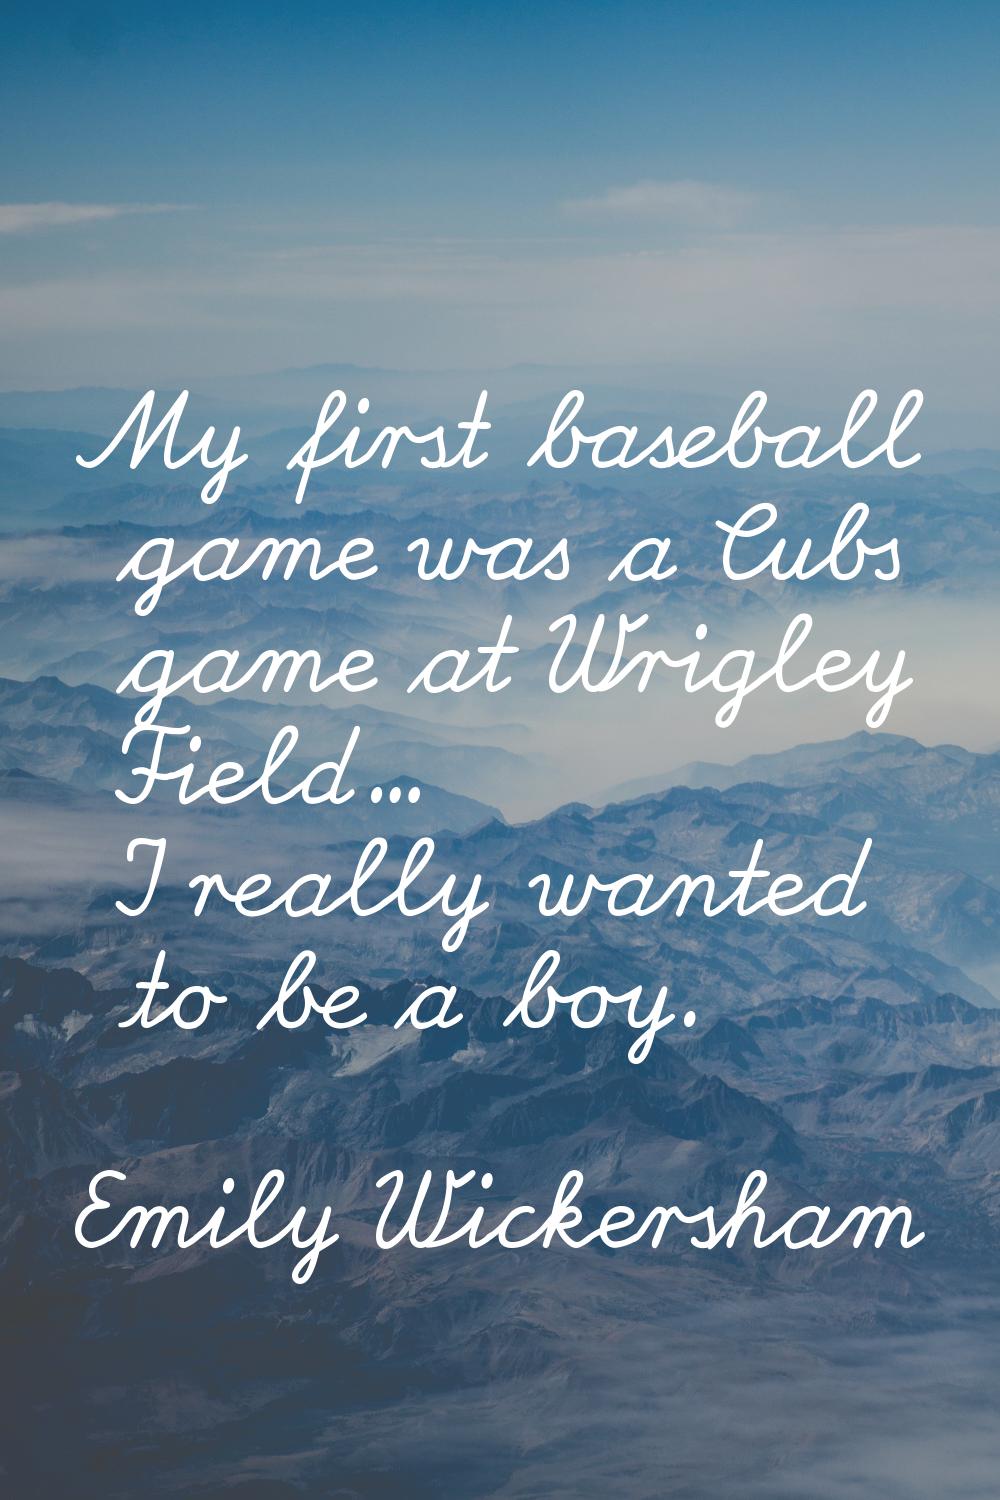 My first baseball game was a Cubs game at Wrigley Field... I really wanted to be a boy.